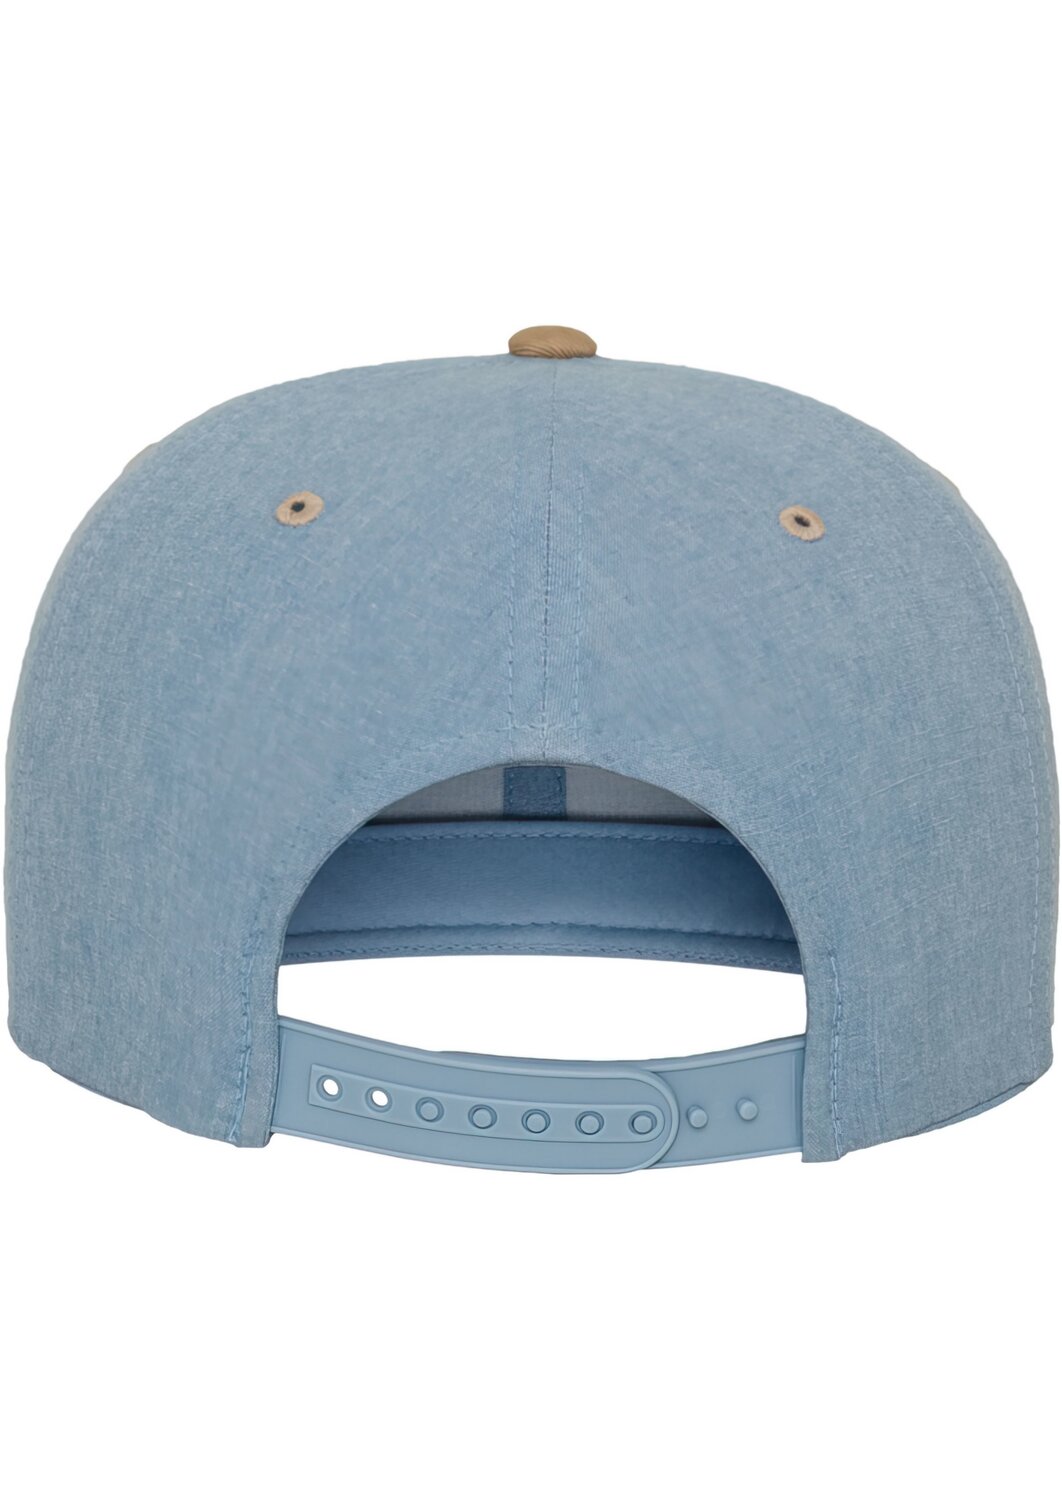 Cap Snapback Chambray-Suede MAXISCOOT | Flexfit blue/beige